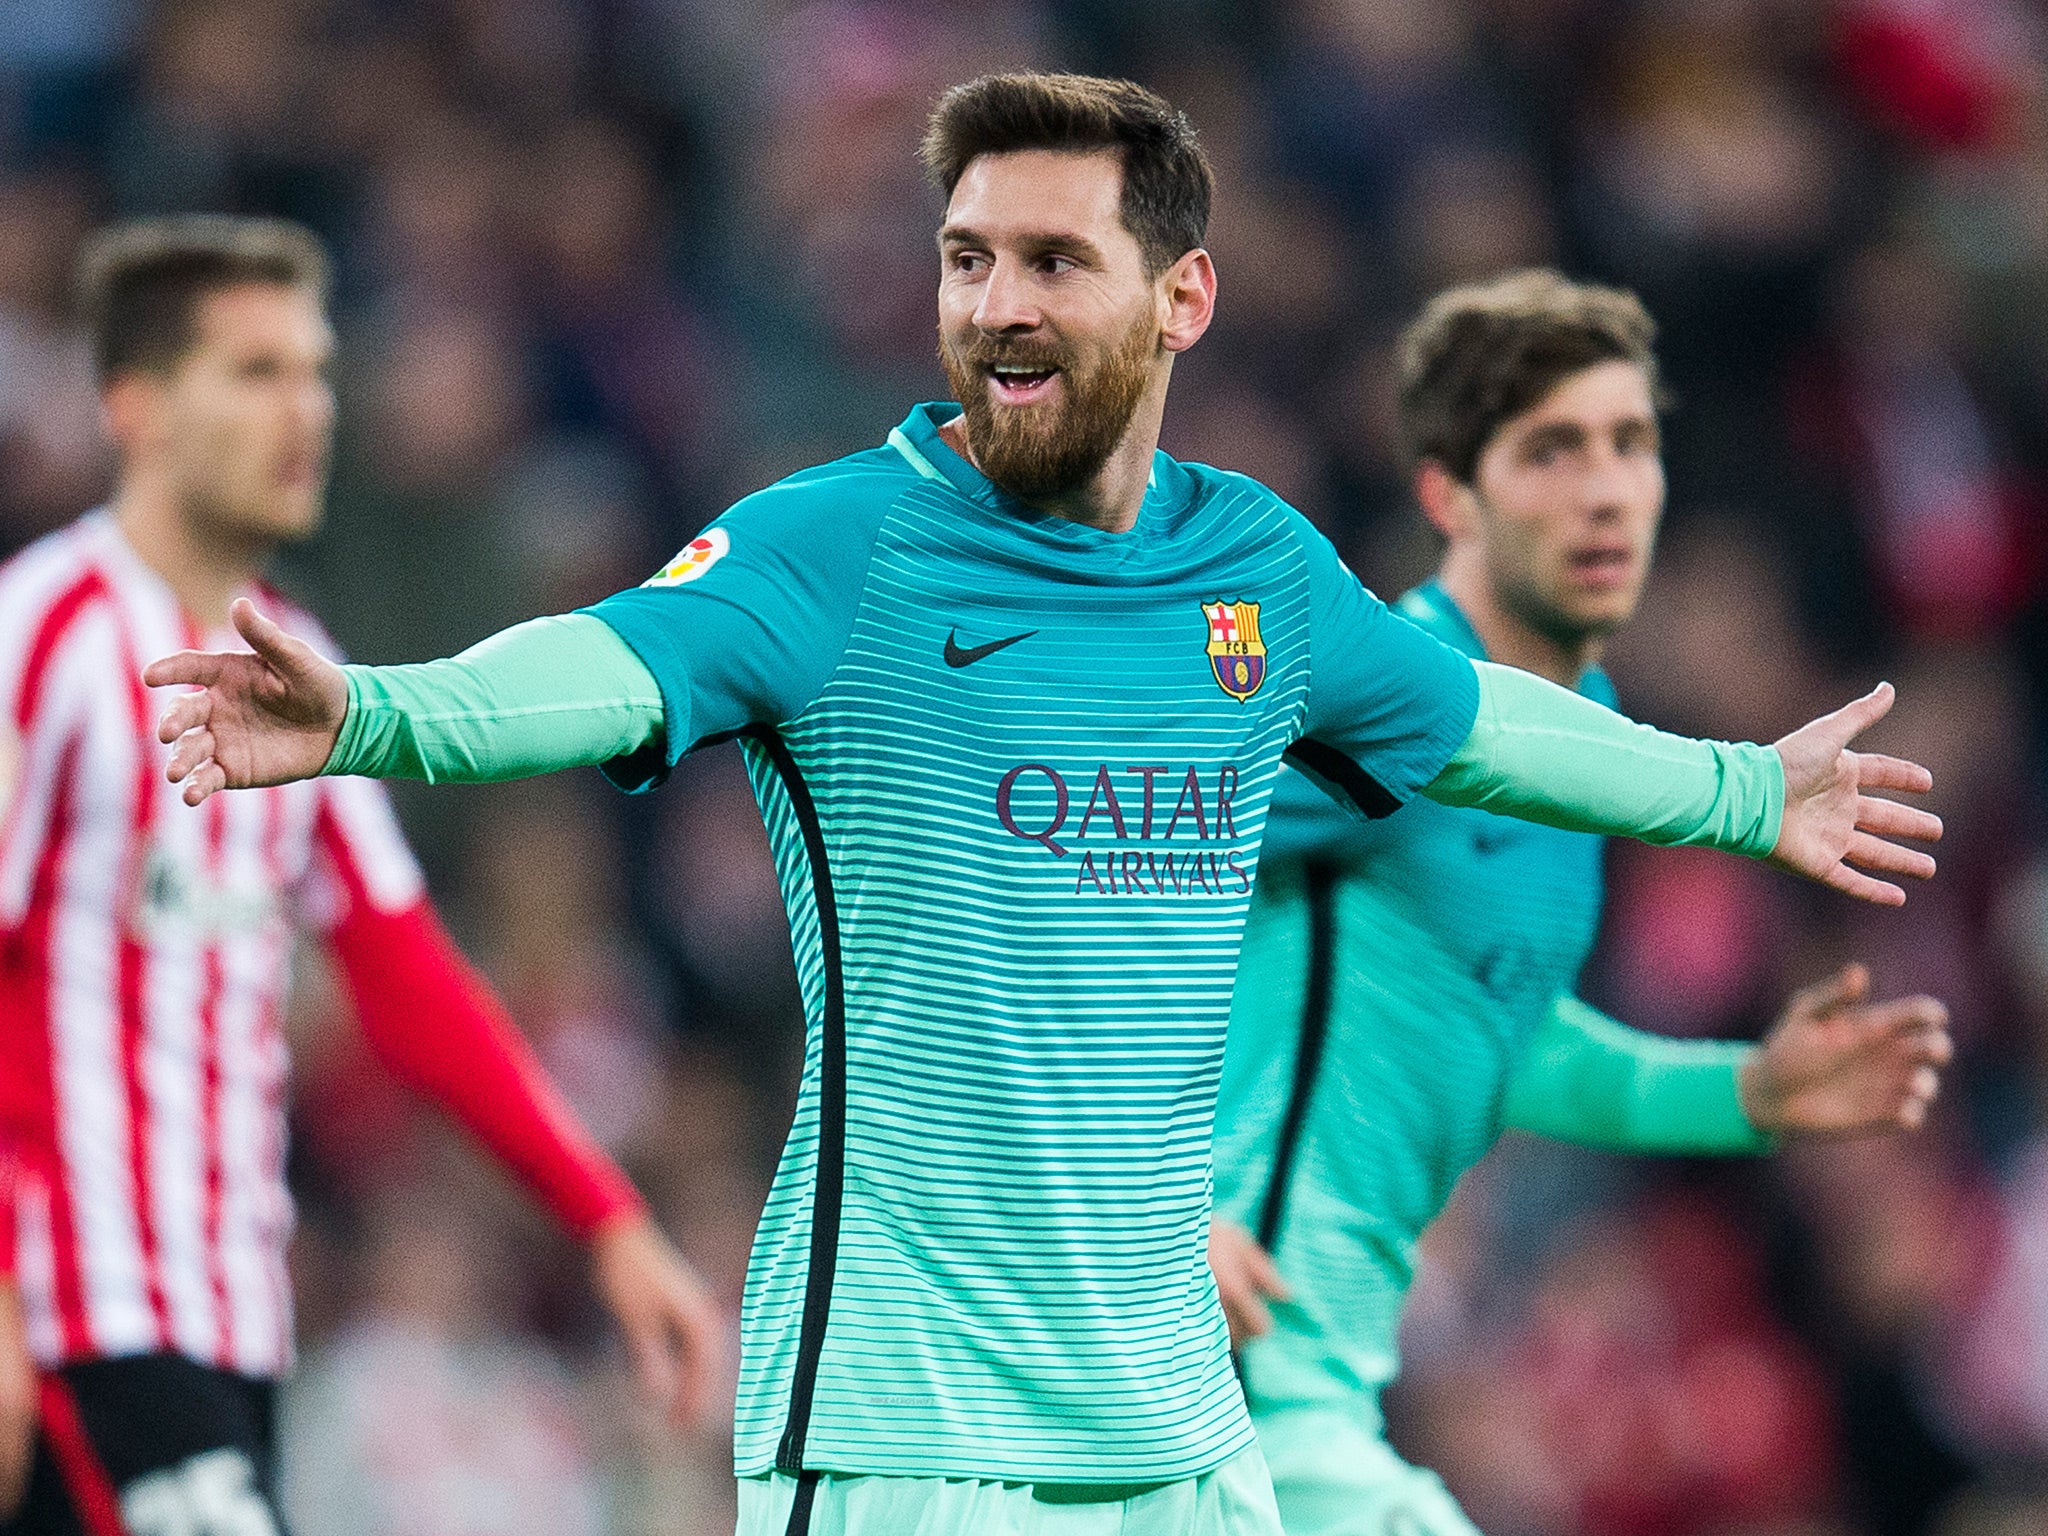 Lionel Messi scored his first goal of 2017 in the midweek Copa del Rey win over Athletic Bilbao